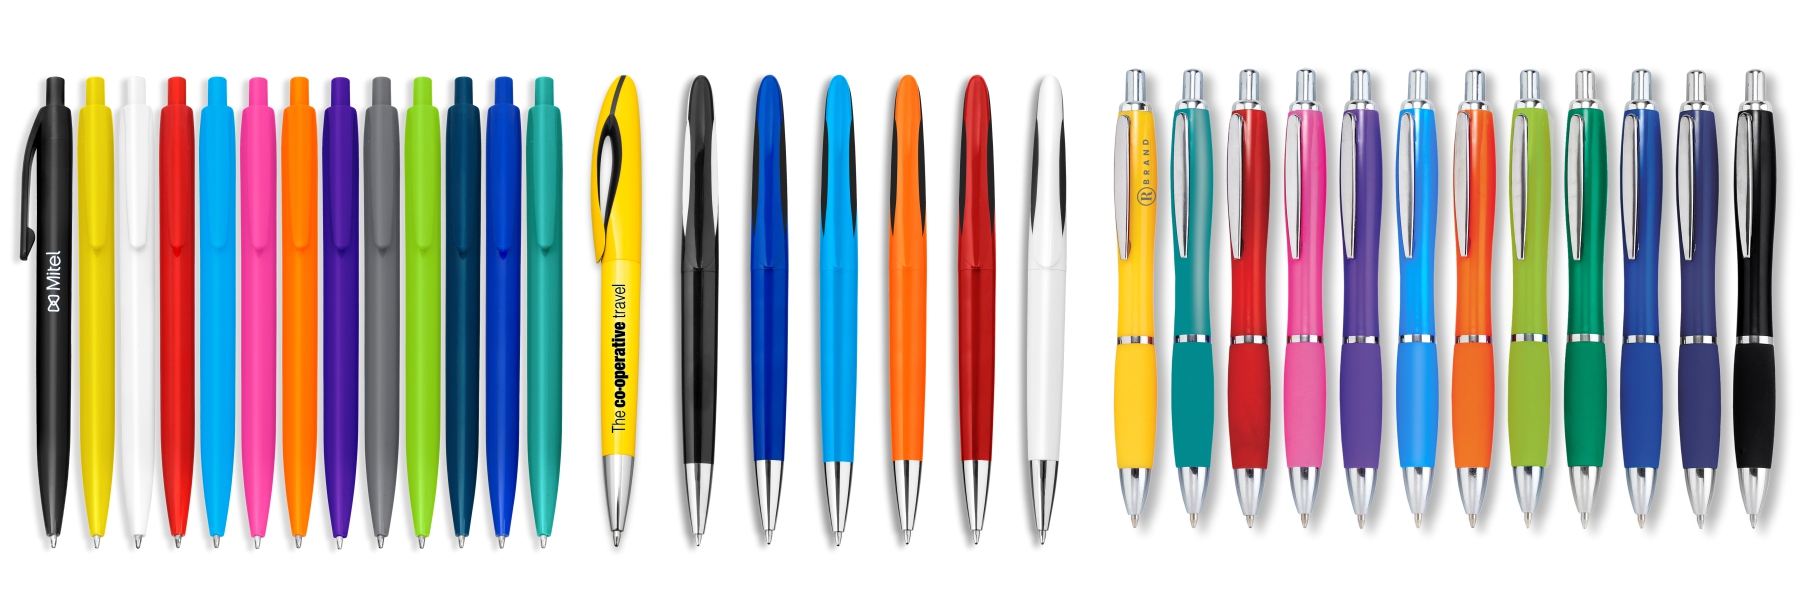 The Power of Custom Printed Promotional Pens -Boosting Brand Recognition and Beyond